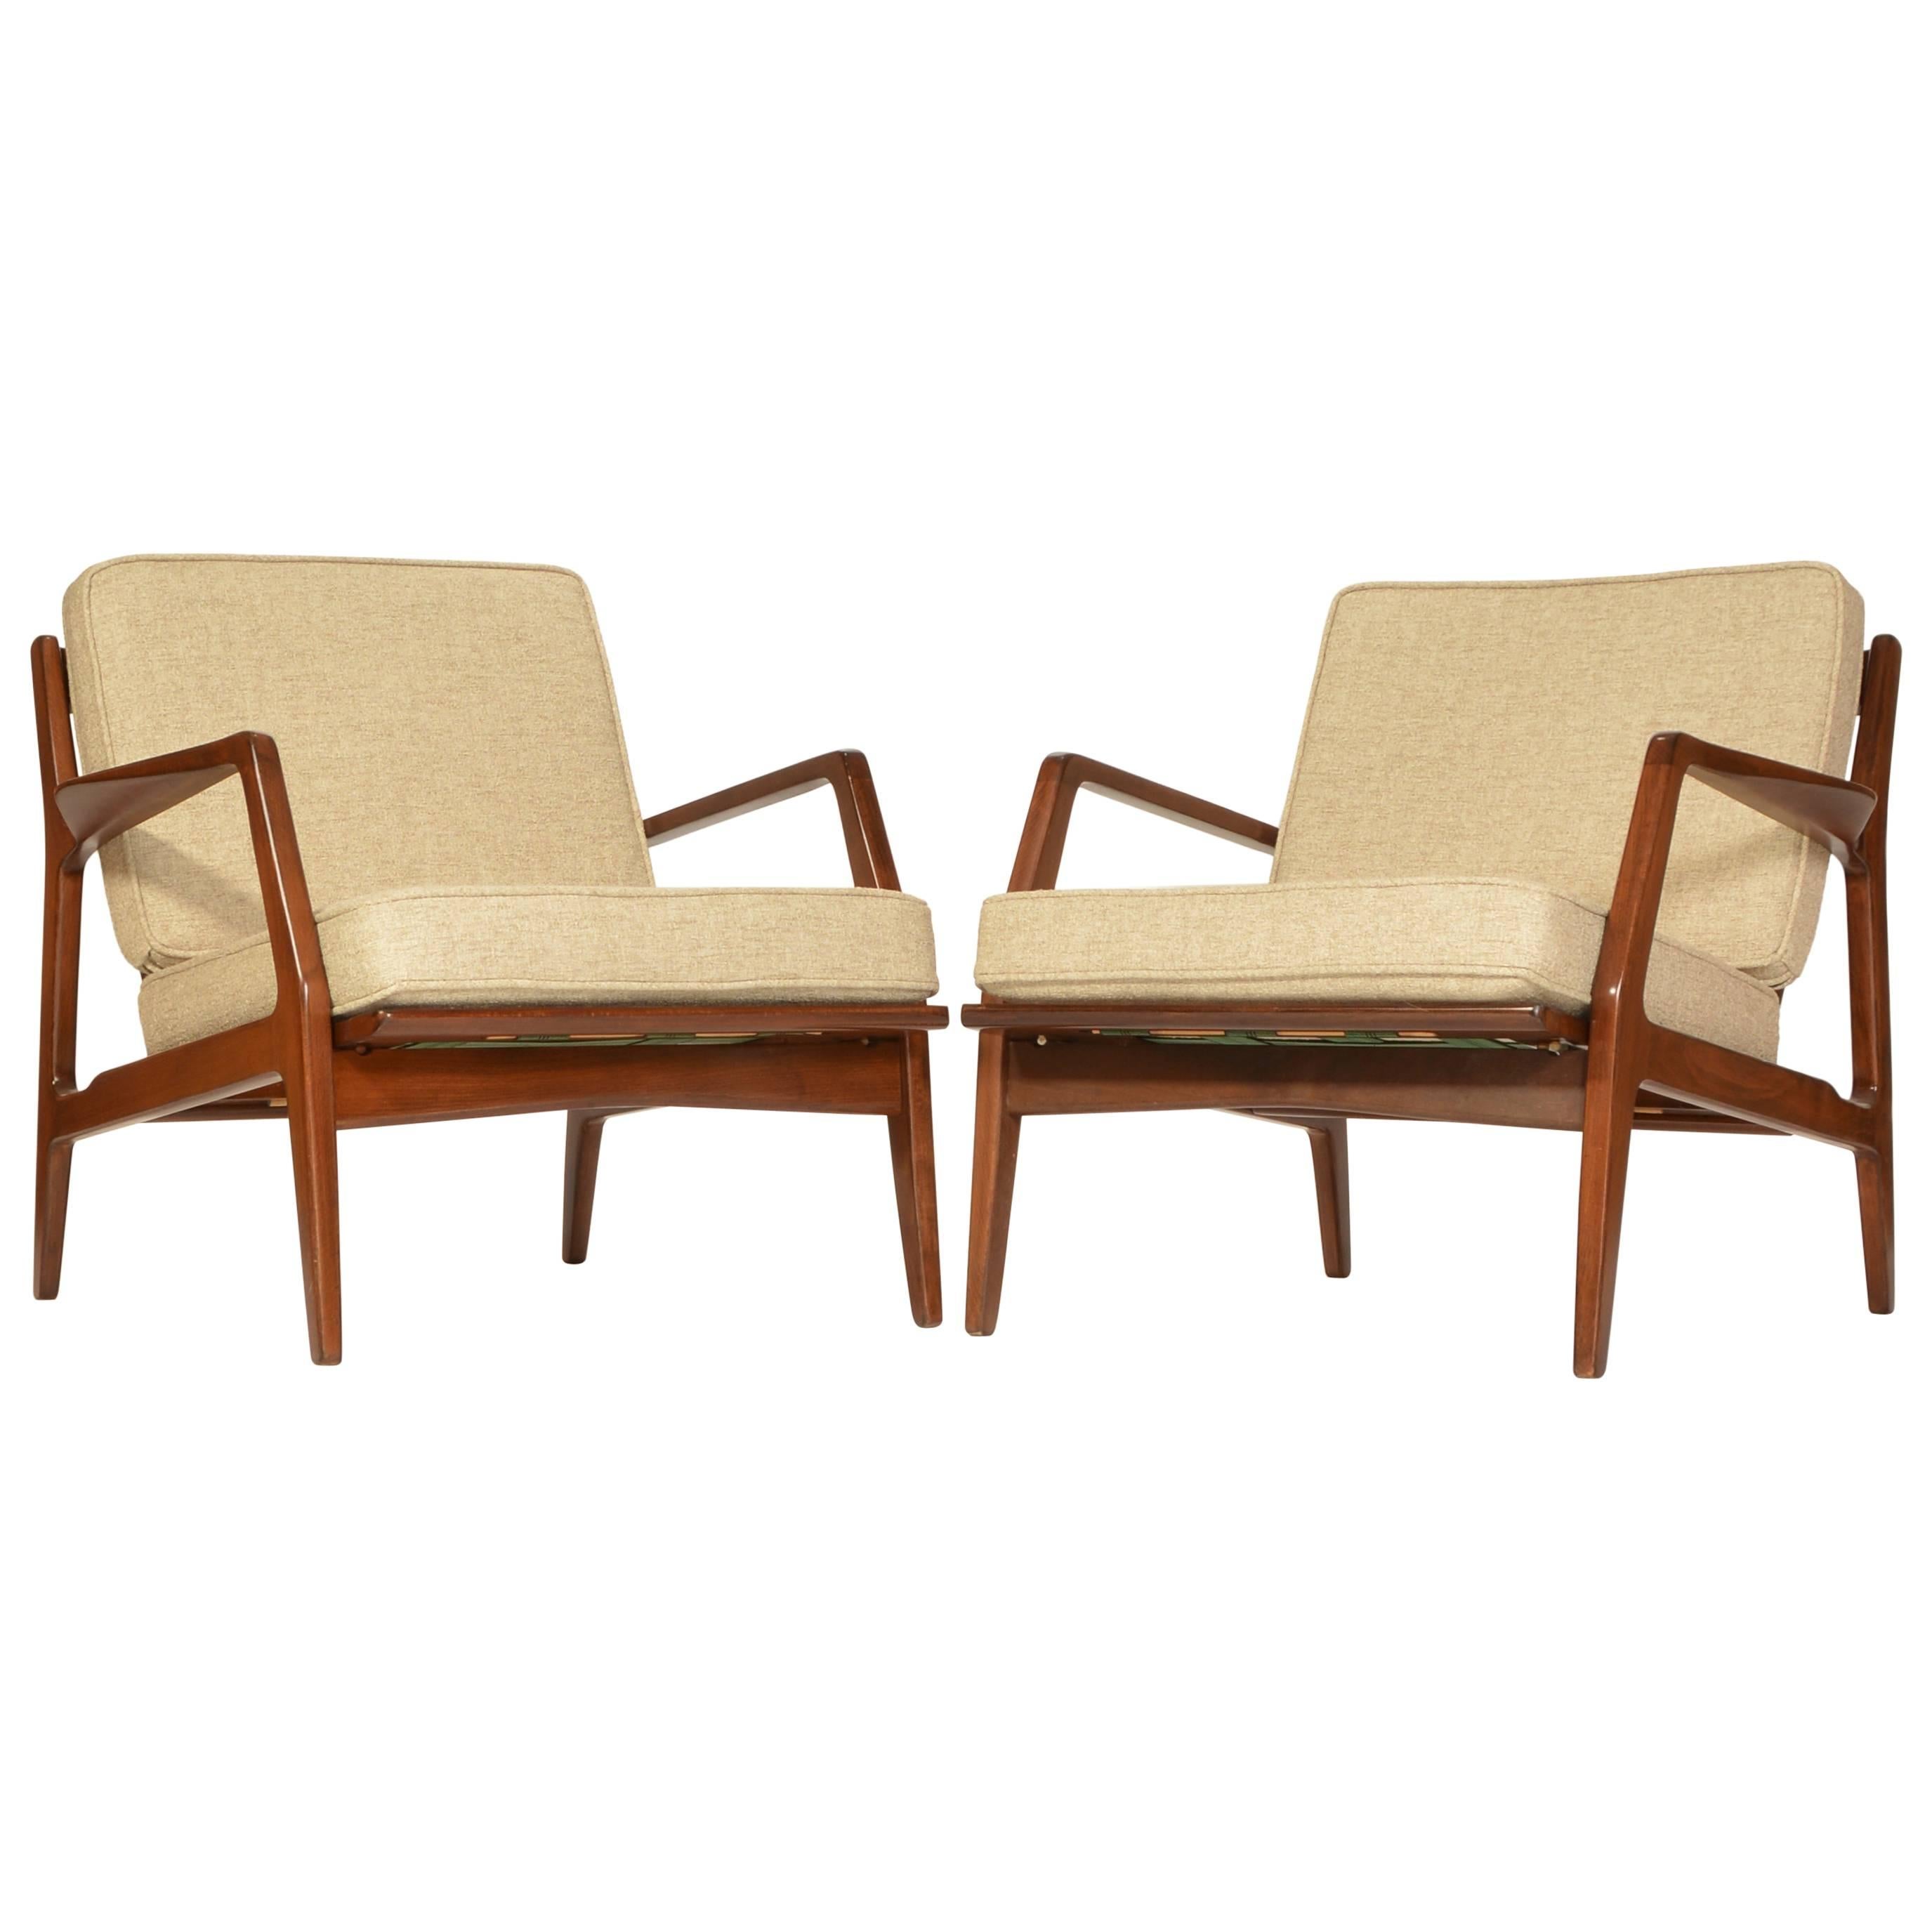 Pair of Danish Lounge Chairs by Ib Kofod-Larsen for Selig, Restored 